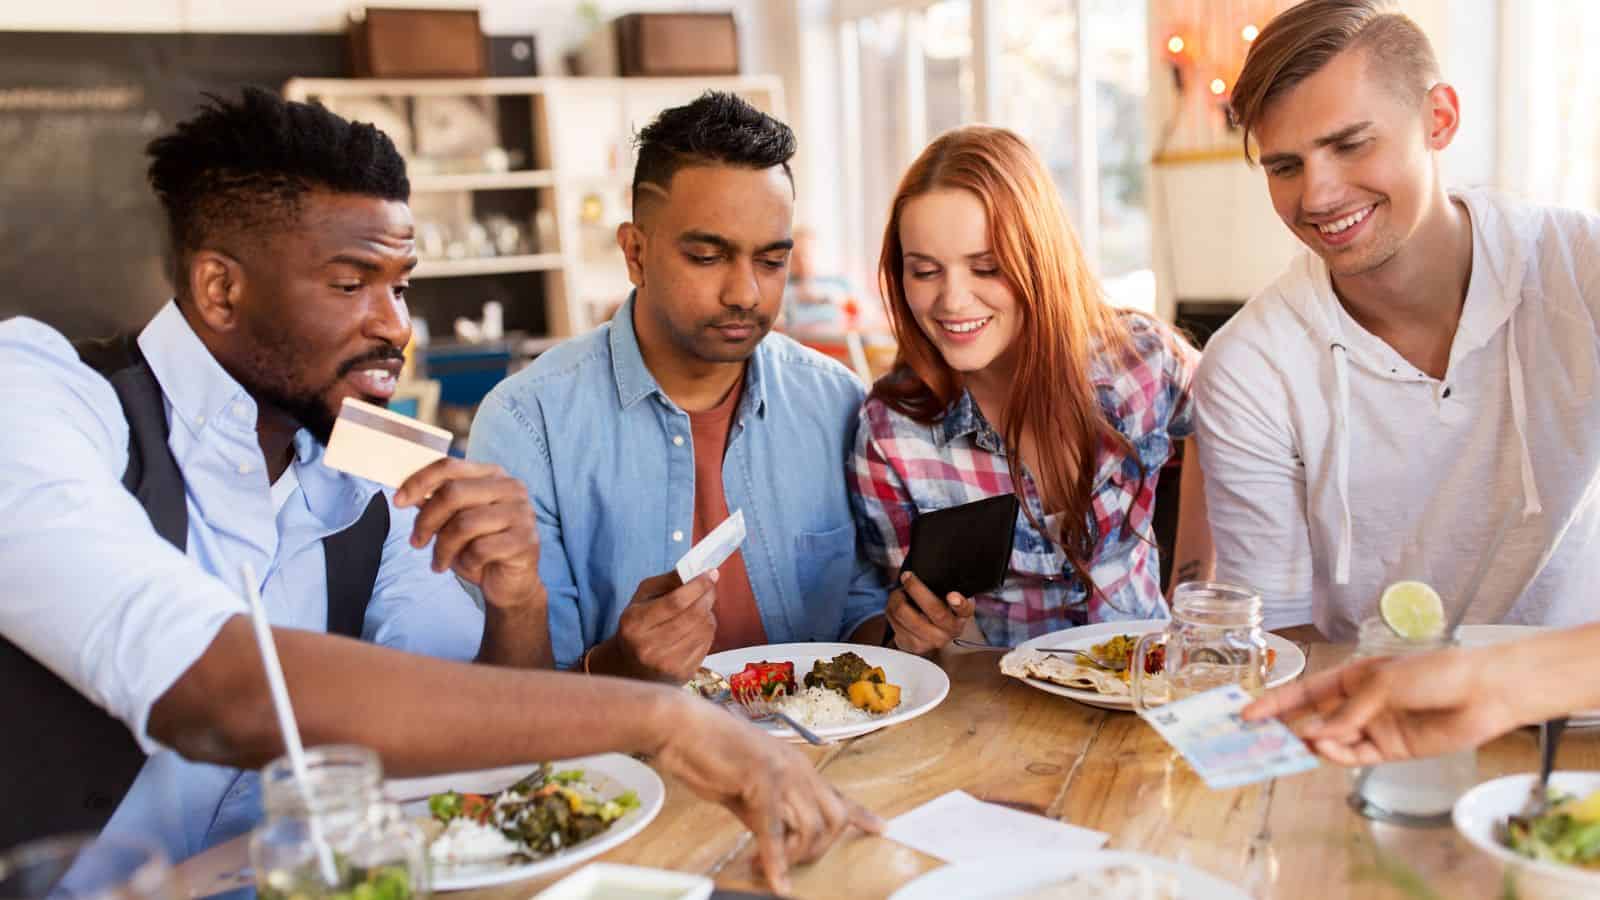 <p>You will most commonly hear this saying in the dating world as it refers to how you split the bill. As the saying may suggest, it actually has no connection to the Netherlands at all and is a US-born saying, simply meaning to split the bill equally between all parties.</p>